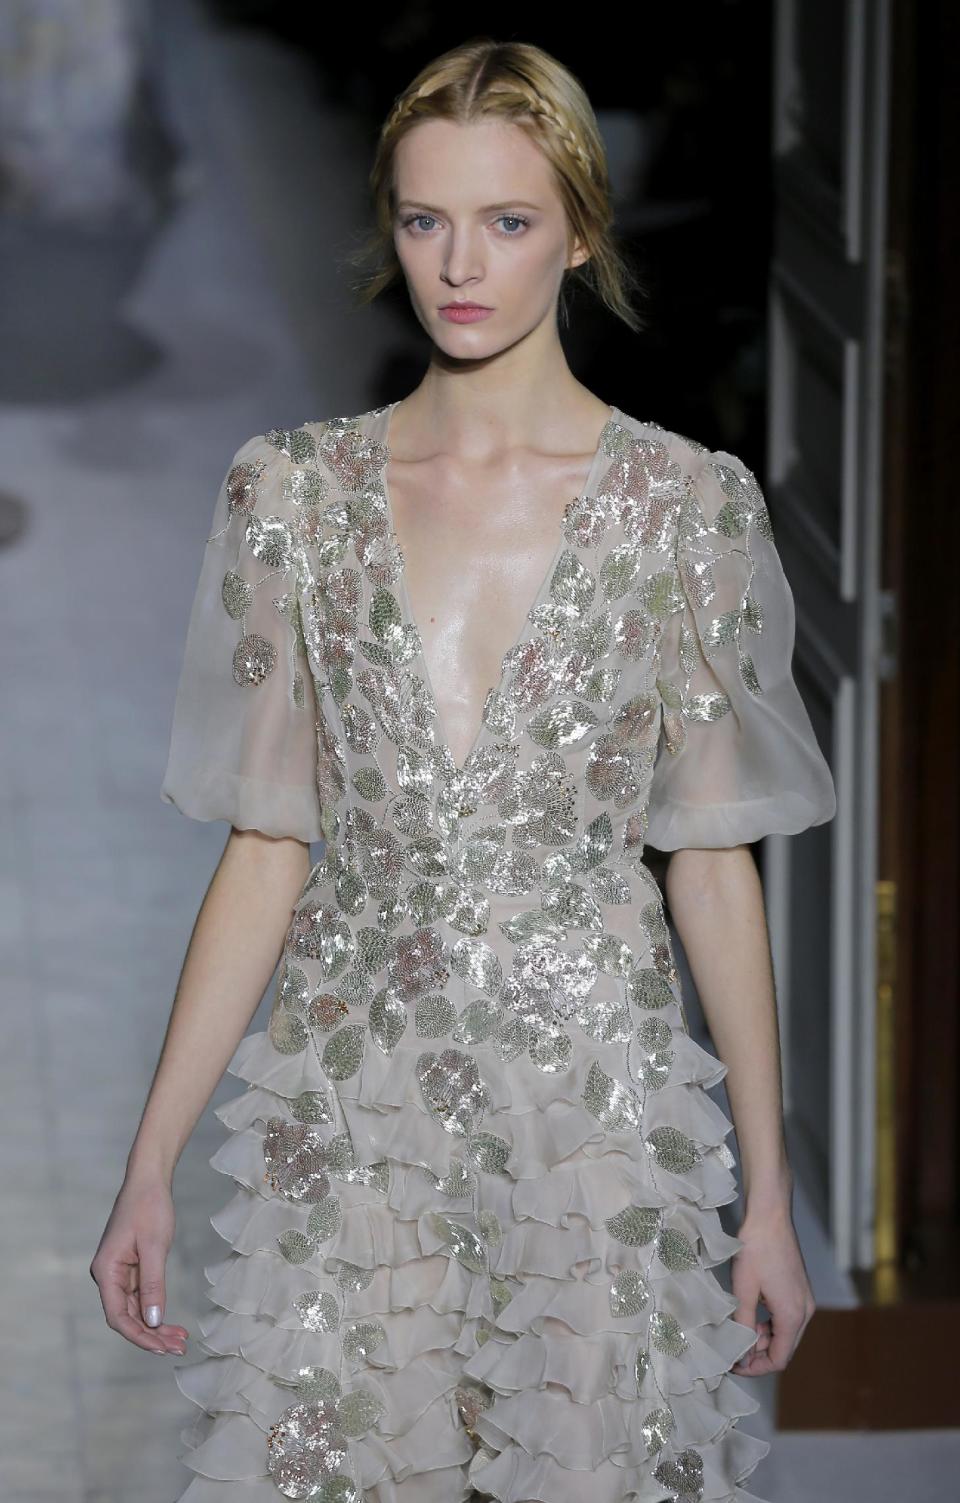 A model wears a creation by fashion designers Maria Grazia Chiuri and Pier Paolo Piccioli for Valentino as part of the Women's Spring/Summer 2013 Haute Couture fashion collection presented in Paris, Wednesday, Jan. 23 2013 (AP Photo/ Jacques Brinon)